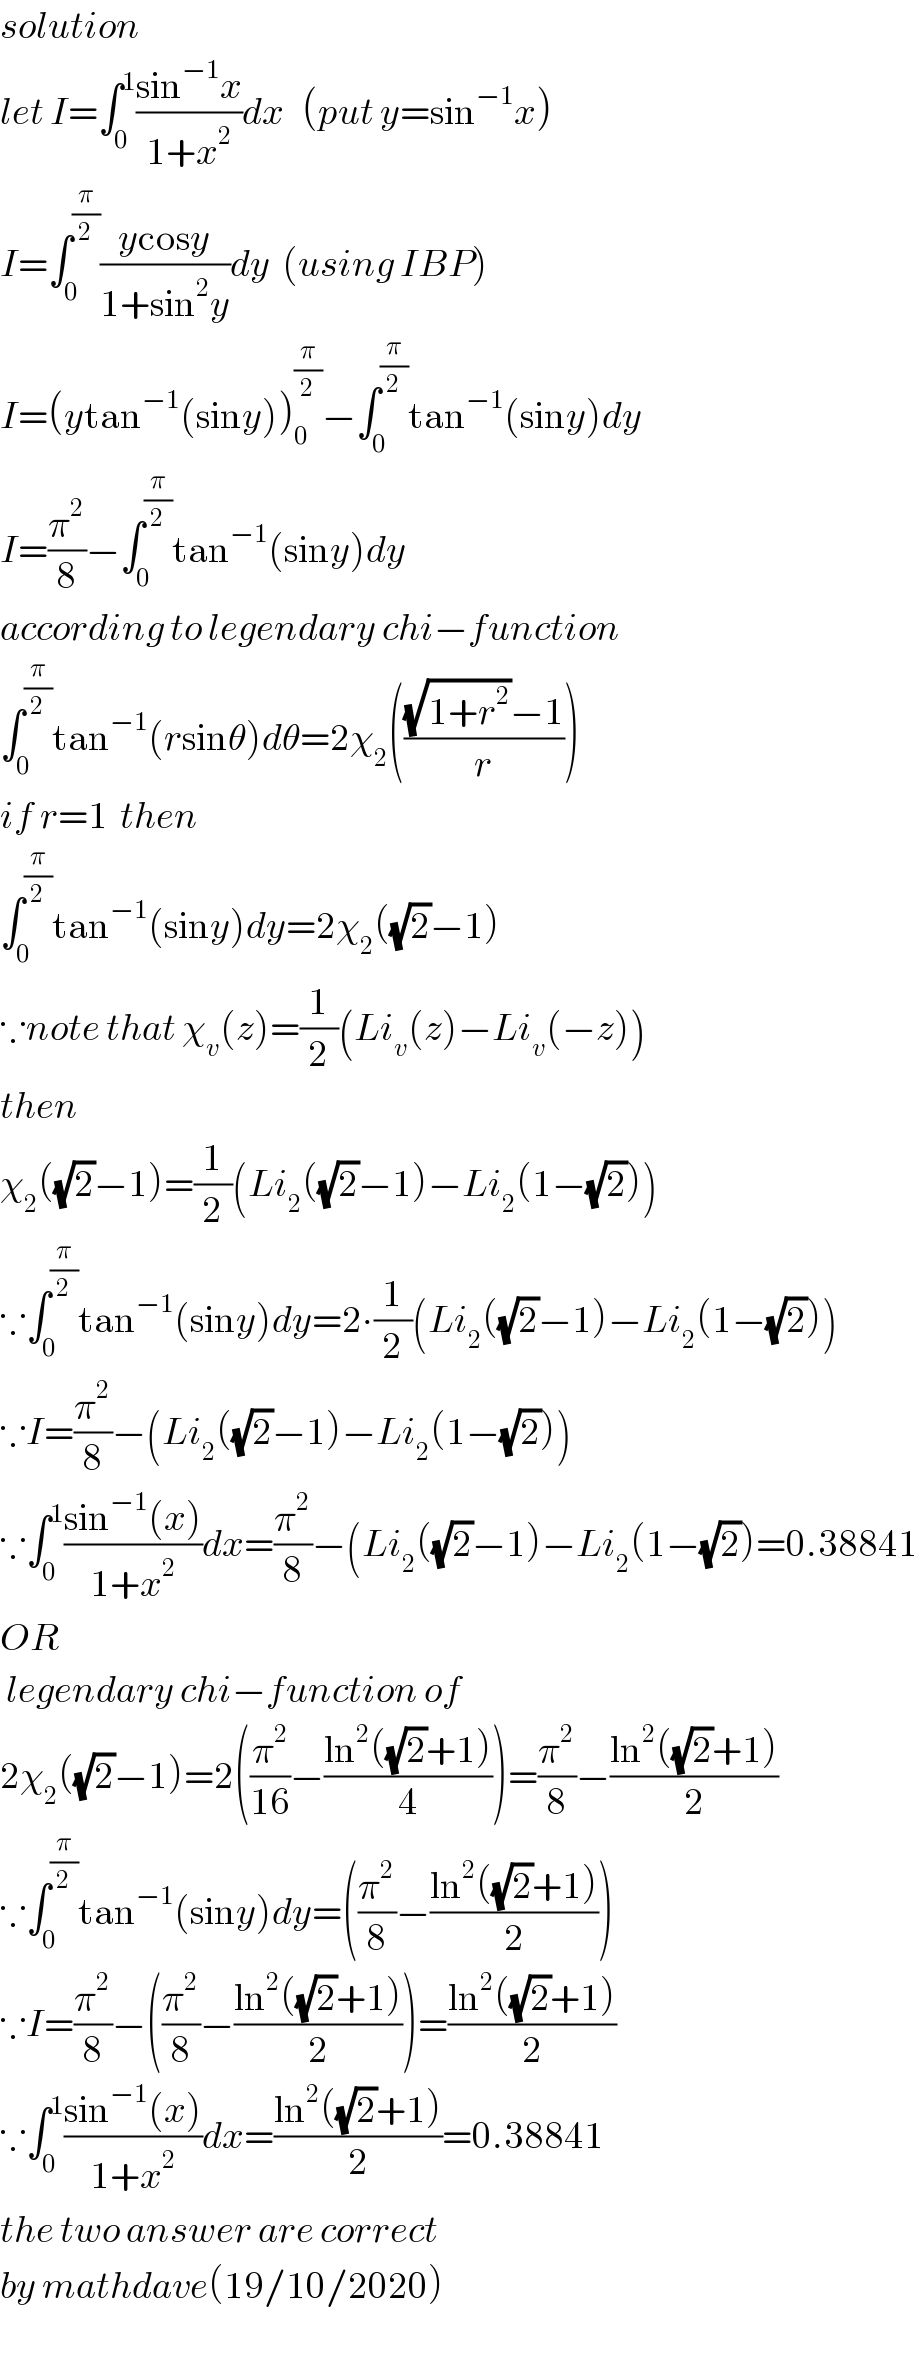 solution  let I=∫_0 ^1 ((sin^(−1) x)/(1+x^2 ))dx   (put y=sin^(−1) x)  I=∫_0 ^(π/2) ((ycosy)/(1+sin^2 y))dy  (using IBP)  I=(ytan^(−1) (siny))_0 ^(π/2) −∫_0 ^(π/2) tan^(−1) (siny)dy  I=(π^2 /8)−∫_0 ^(π/2) tan^(−1) (siny)dy  according to legendary chi−function  ∫_0 ^(π/2) tan^(−1) (rsinθ)dθ=2χ_2 ((((√(1+r^2 ))−1)/r))  if r=1  then  ∫_0 ^(π/2) tan^(−1) (siny)dy=2χ_2 ((√2)−1)  ∵note that χ_v (z)=(1/2)(Li_v (z)−Li_v (−z))  then  χ_2 ((√2)−1)=(1/2)(Li_2 ((√2)−1)−Li_2 (1−(√2)))  ∵∫_0 ^(π/2) tan^(−1) (siny)dy=2∙(1/2)(Li_2 ((√2)−1)−Li_2 (1−(√2)))  ∵I=(π^2 /8)−(Li_2 ((√2)−1)−Li_2 (1−(√2)))  ∵∫_0 ^1 ((sin^(−1) (x))/(1+x^2 ))dx=(π^2 /8)−(Li_2 ((√2)−1)−Li_2 (1−(√2))=0.38841  OR    legendary chi−function of  2χ_2 ((√2)−1)=2((π^2 /(16))−((ln^2 ((√2)+1))/4))=(π^2 /8)−((ln^2 ((√2)+1))/2)  ∵∫_0 ^(π/2) tan^(−1) (siny)dy=((π^2 /8)−((ln^2 ((√2)+1))/2))  ∵I=(π^2 /8)−((π^2 /8)−((ln^2 ((√2)+1))/2))=((ln^2 ((√2)+1))/2)  ∵∫_0 ^1 ((sin^(−1) (x))/(1+x^2 ))dx=((ln^2 ((√2)+1))/2)=0.38841  the two answer are correct   by mathdave(19/10/2020)  